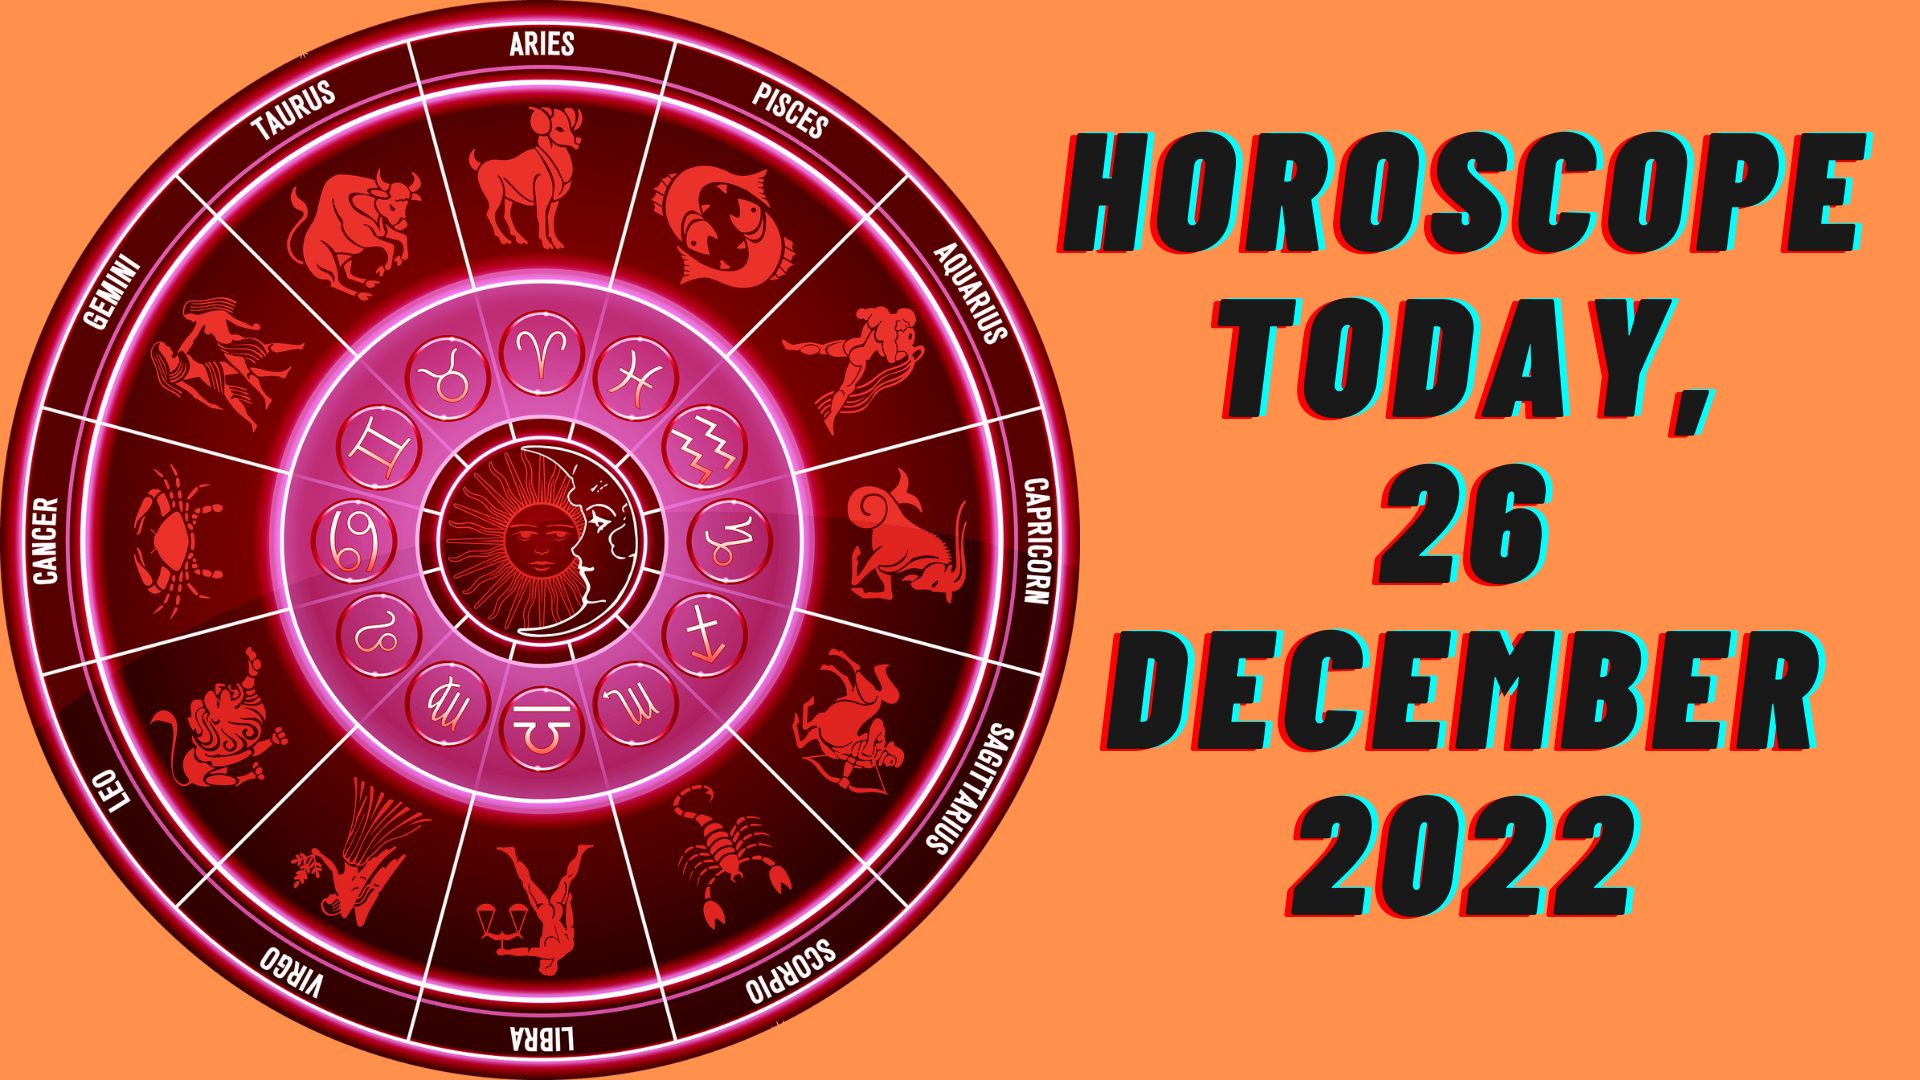 Horoscope Today, 26 December 2022 - Check Astrological Prediction Of Your Zodiac Sign